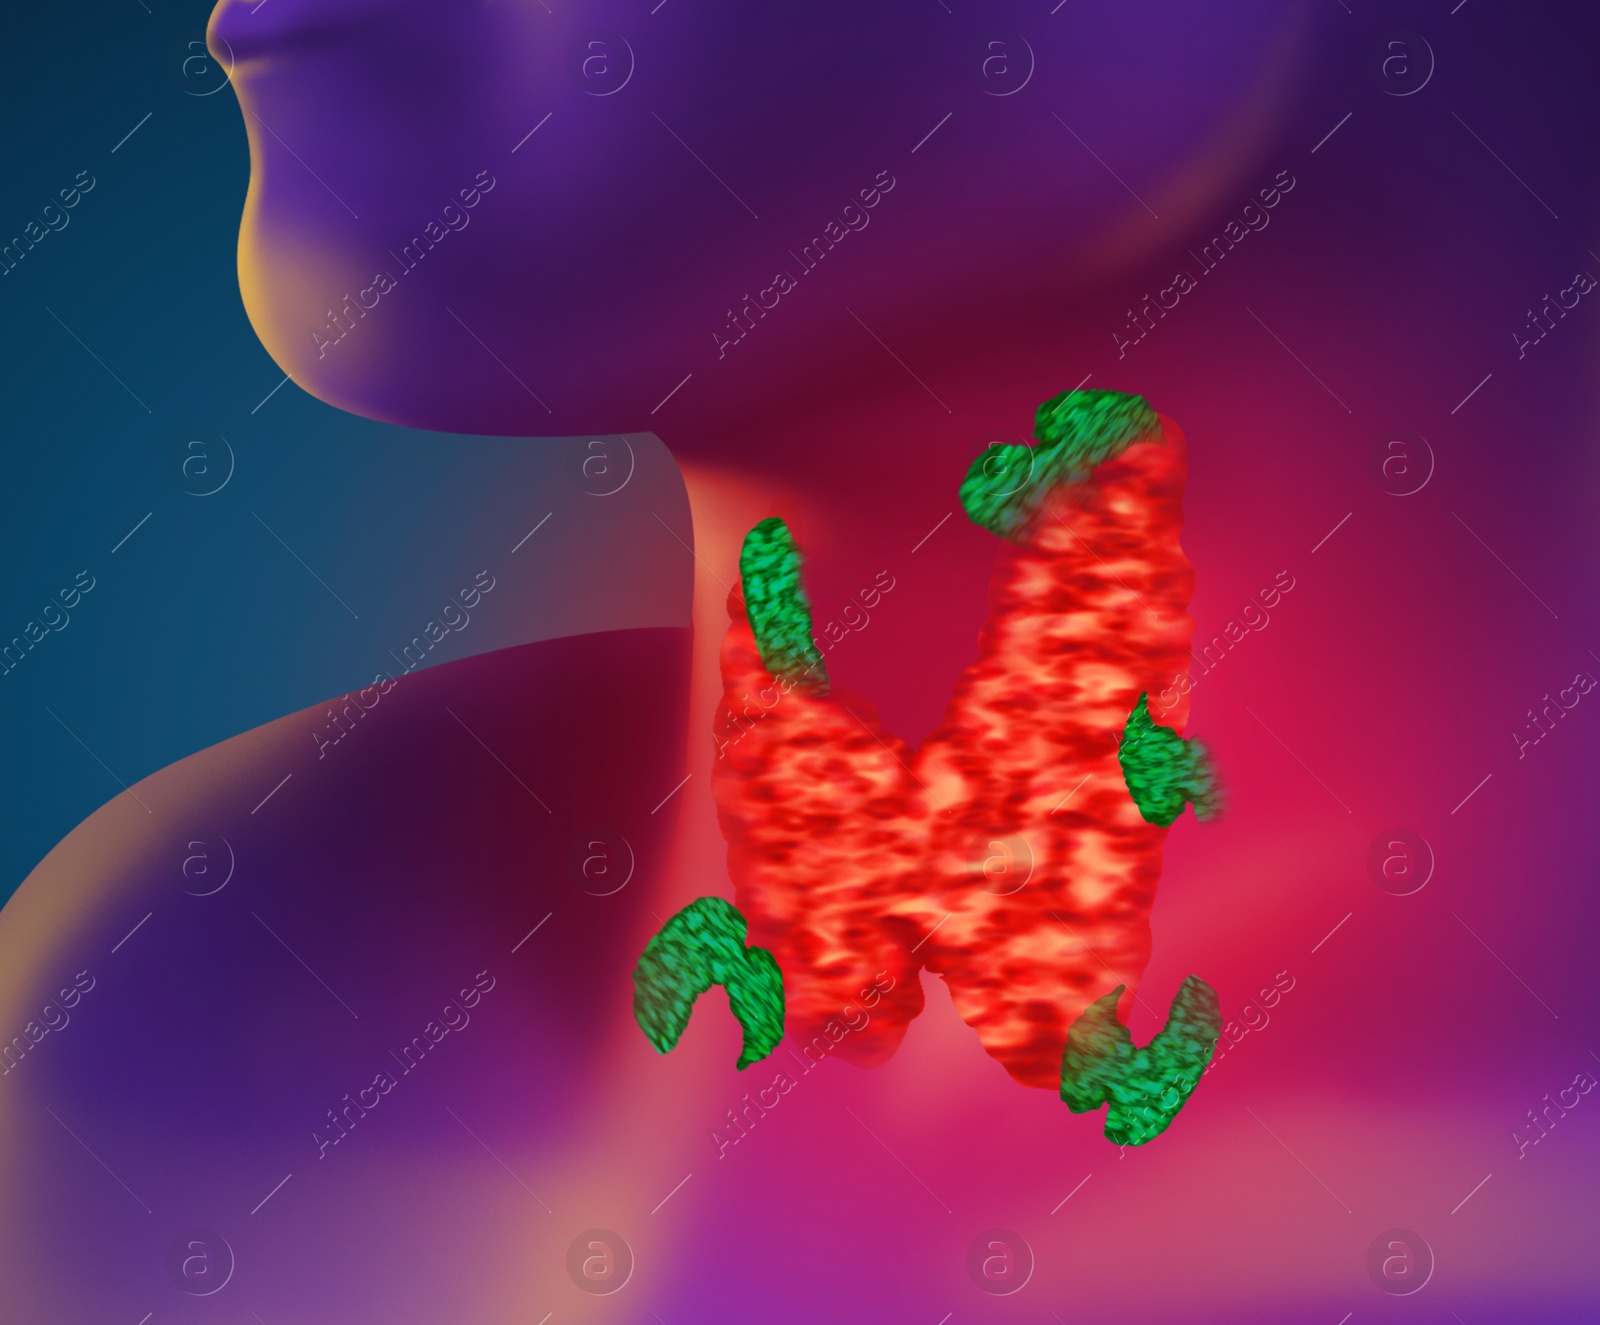 Illustration of  human with inflamed thyroid gland on color background